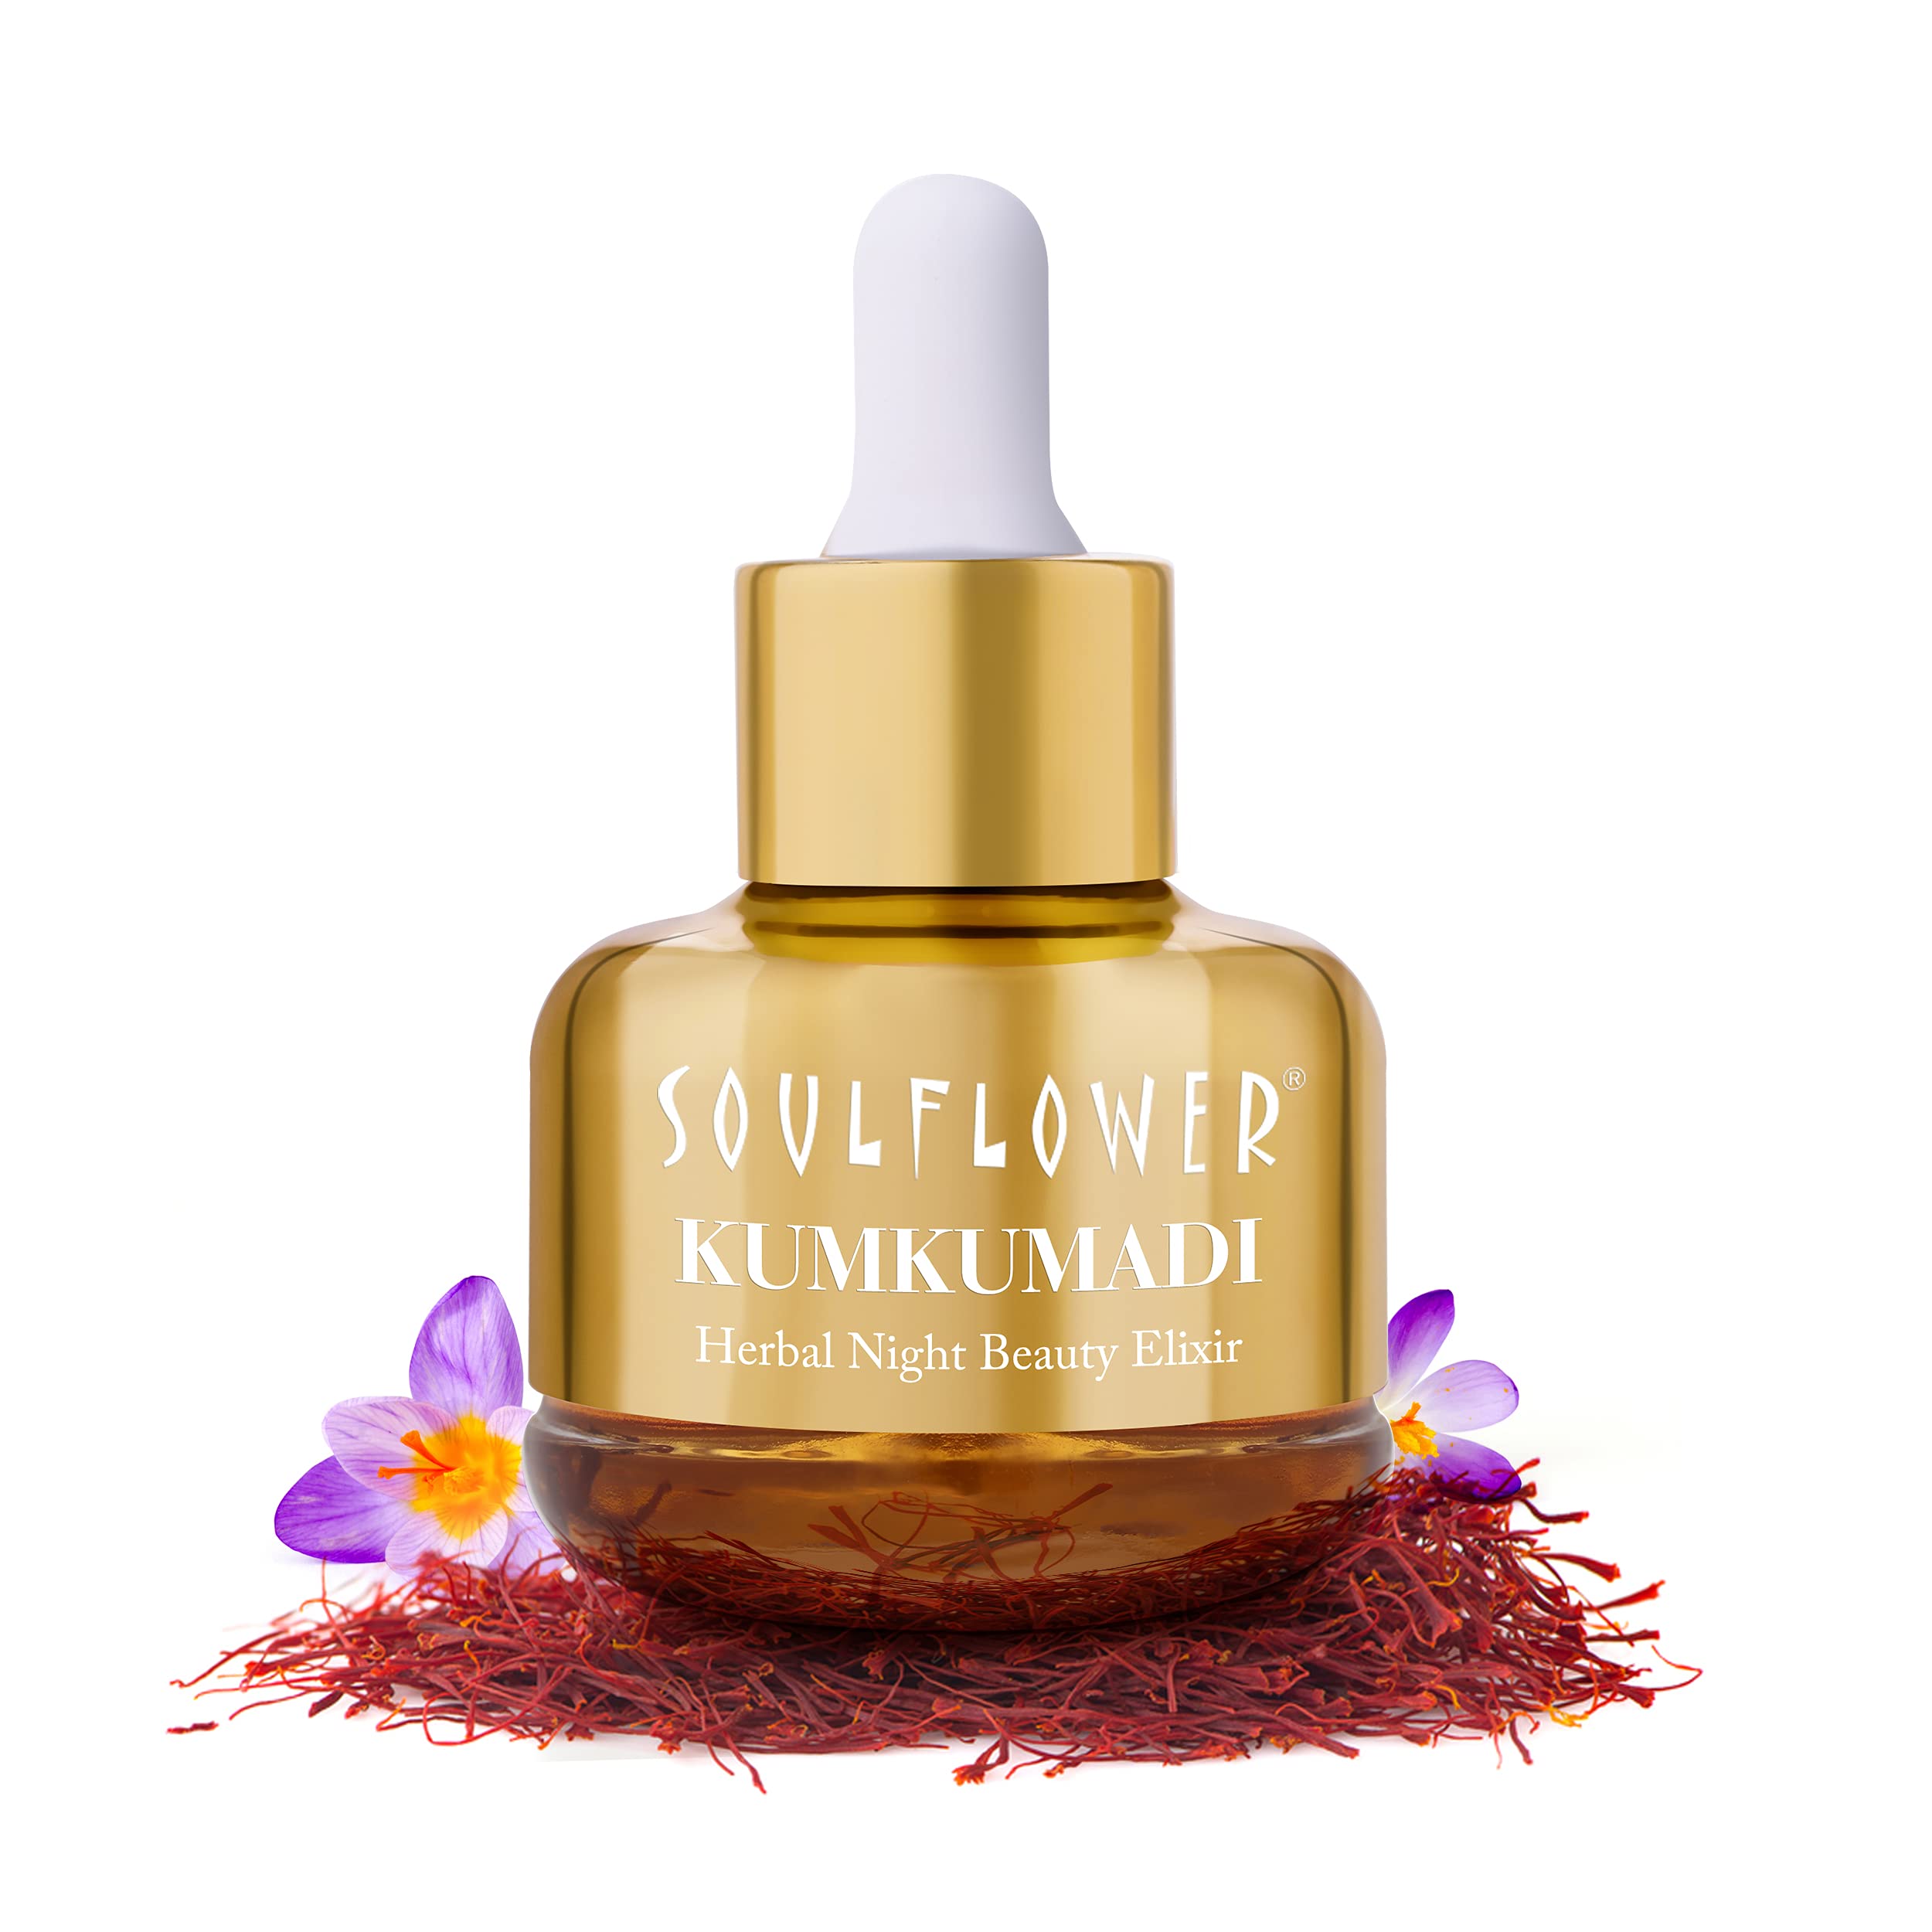 Soulflower Kumkumadi Skin Oil - Pure, Natural and Organic Tailam Face Serum with Precious Oils of Saffron and Almond for Skin Moisturizing, Pigment...